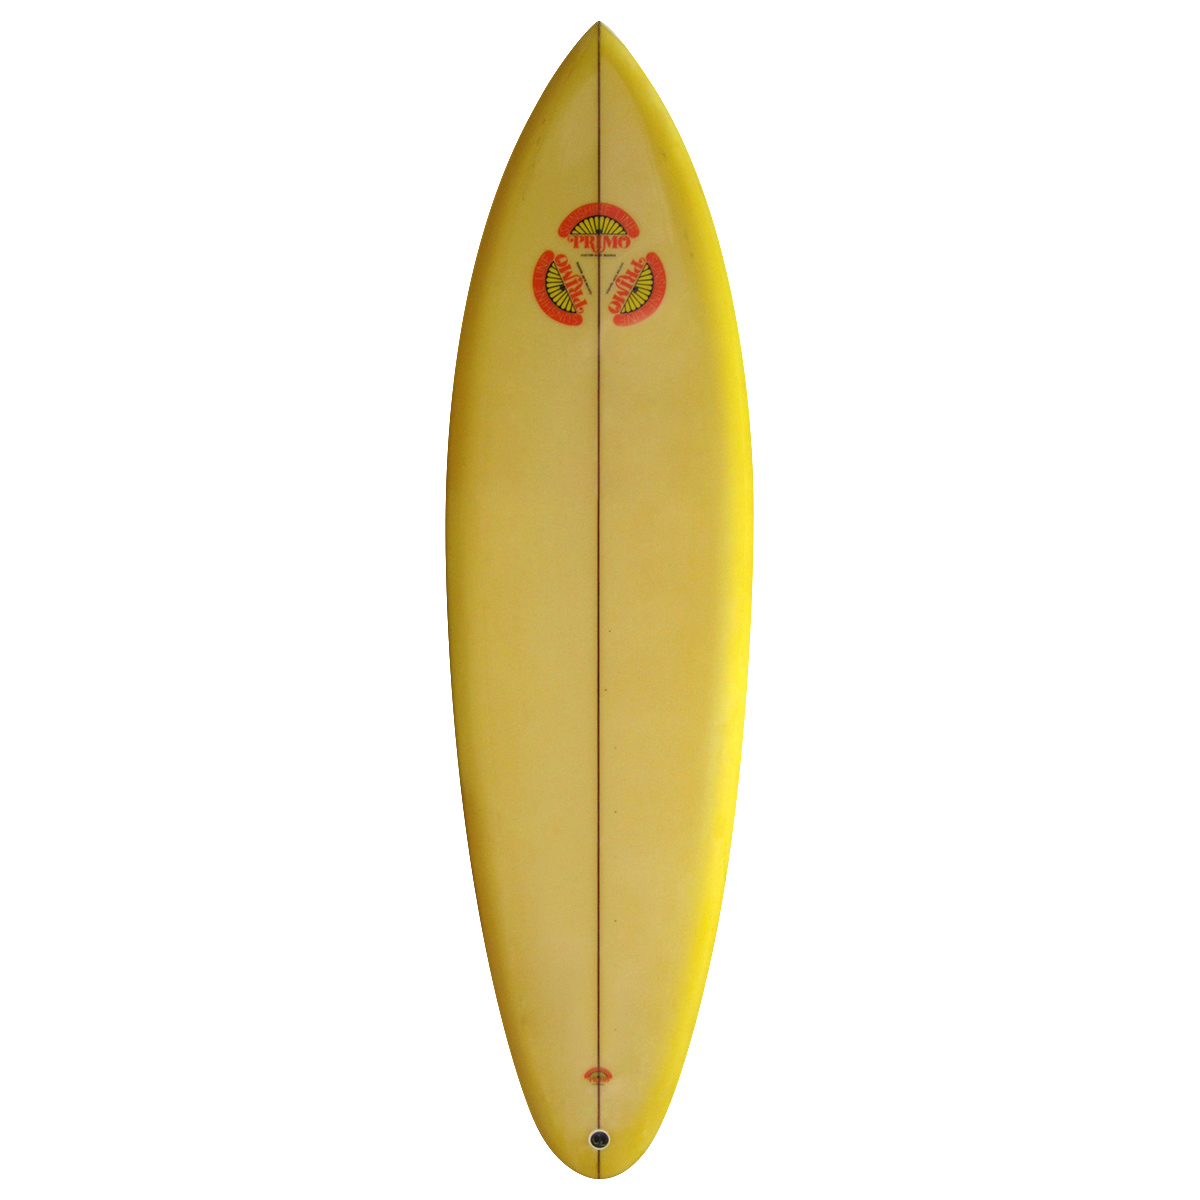  / PRIMO SURFBOARDS / Vintage Single Pin 6'2